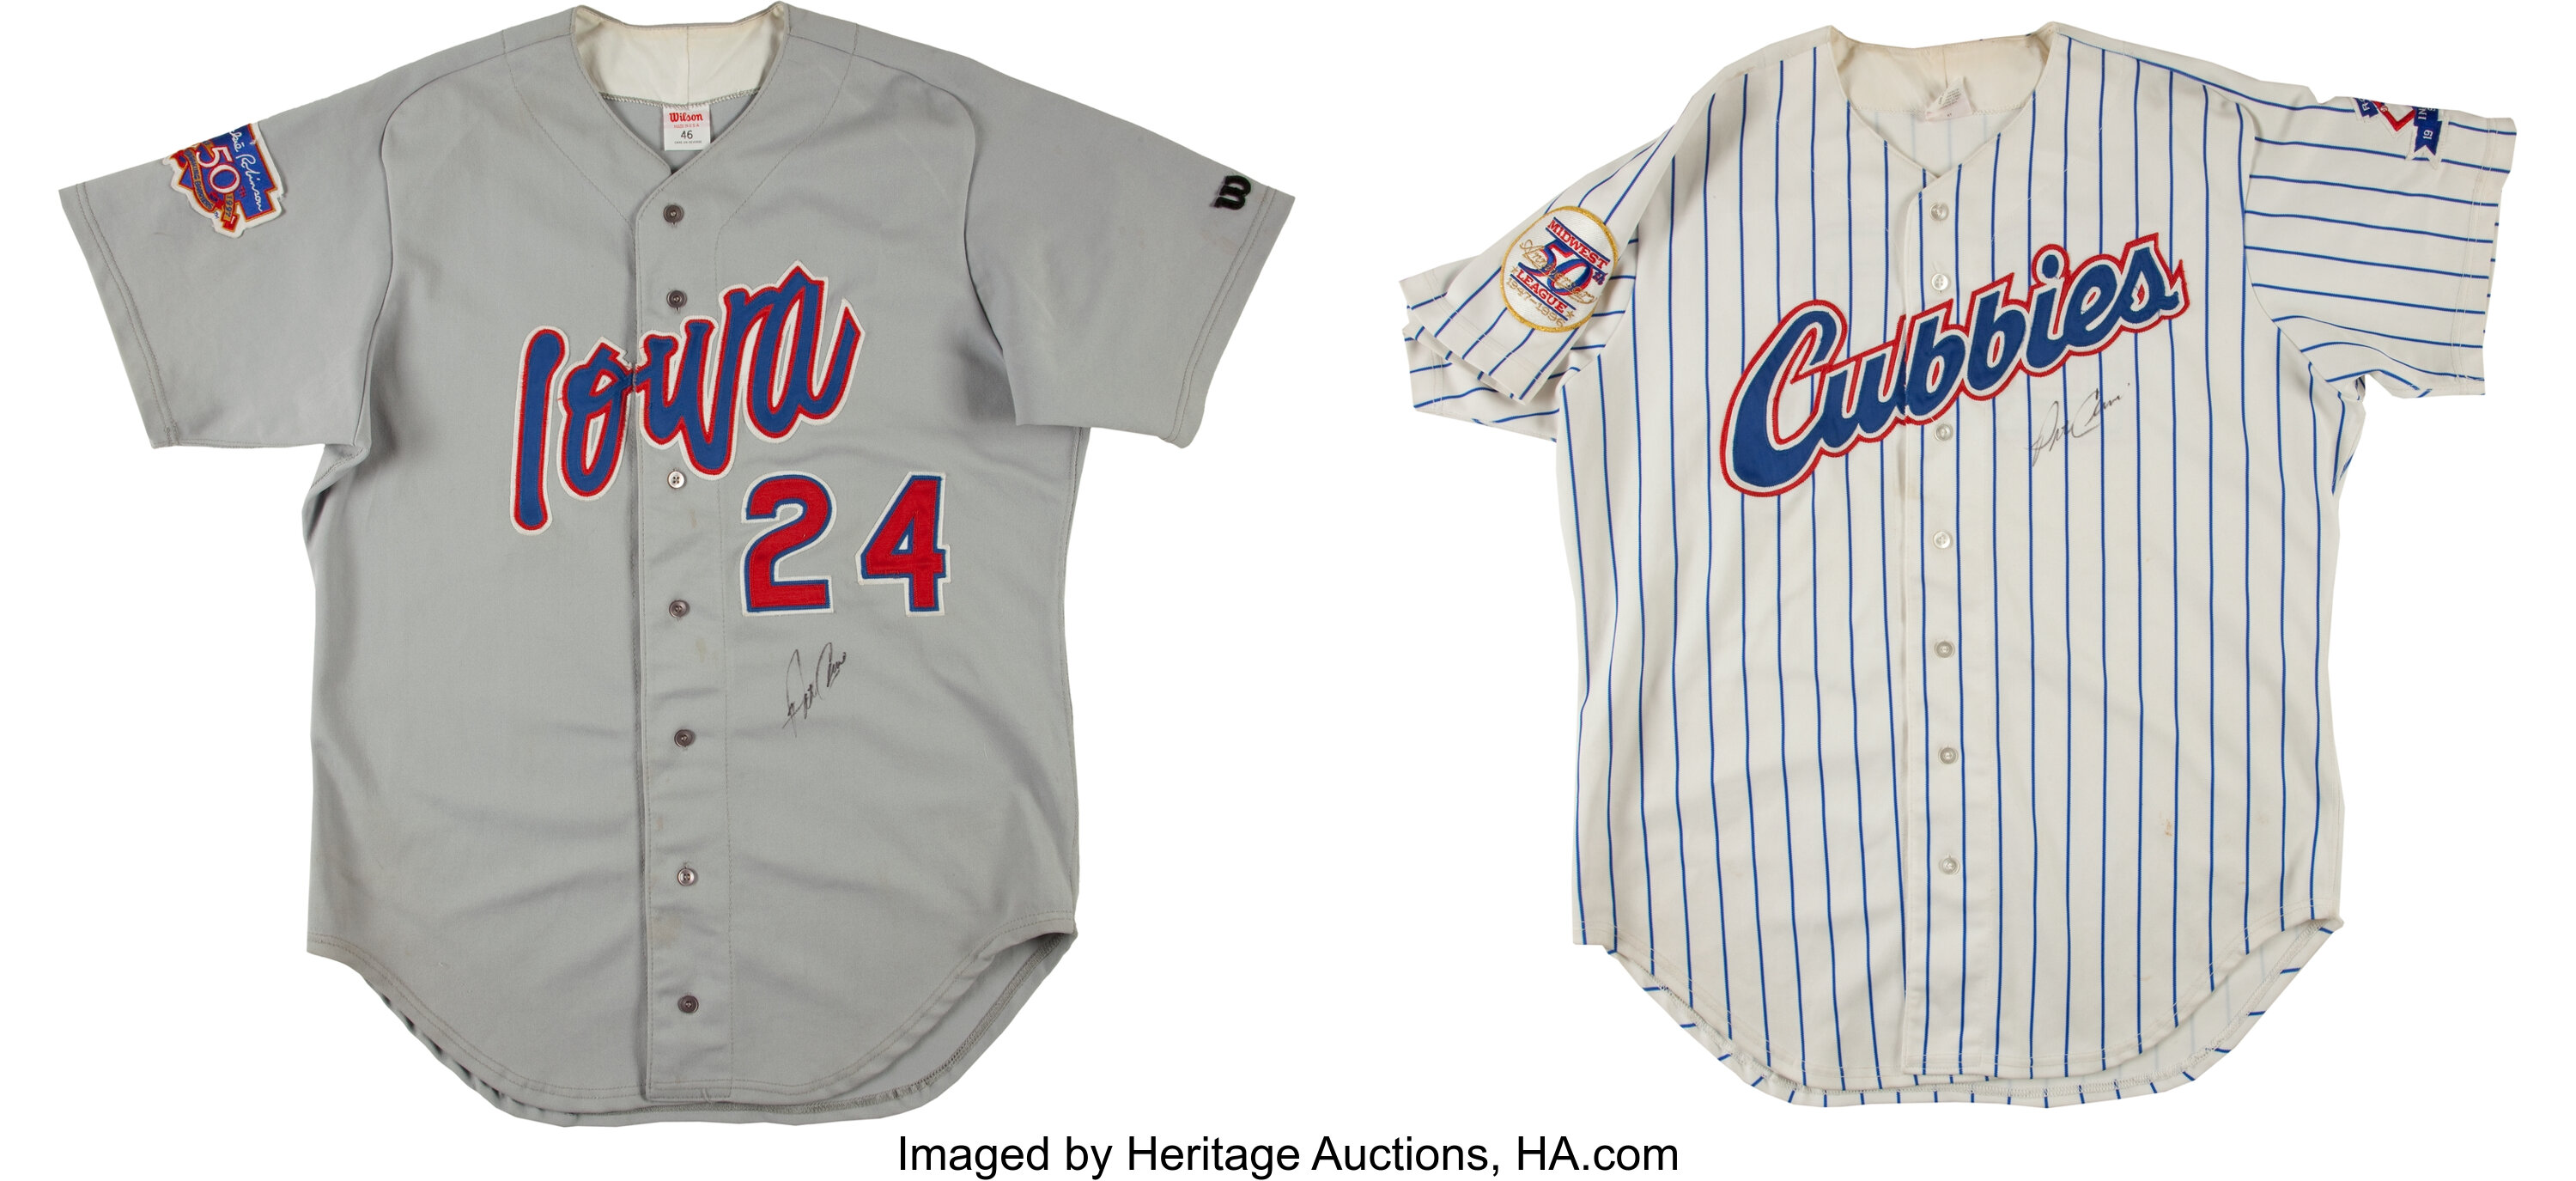 Iowa Cubs - Like the Chicago Cubs' jerseys? Well good news we have Iowa Cubs  replica jerseys as well!